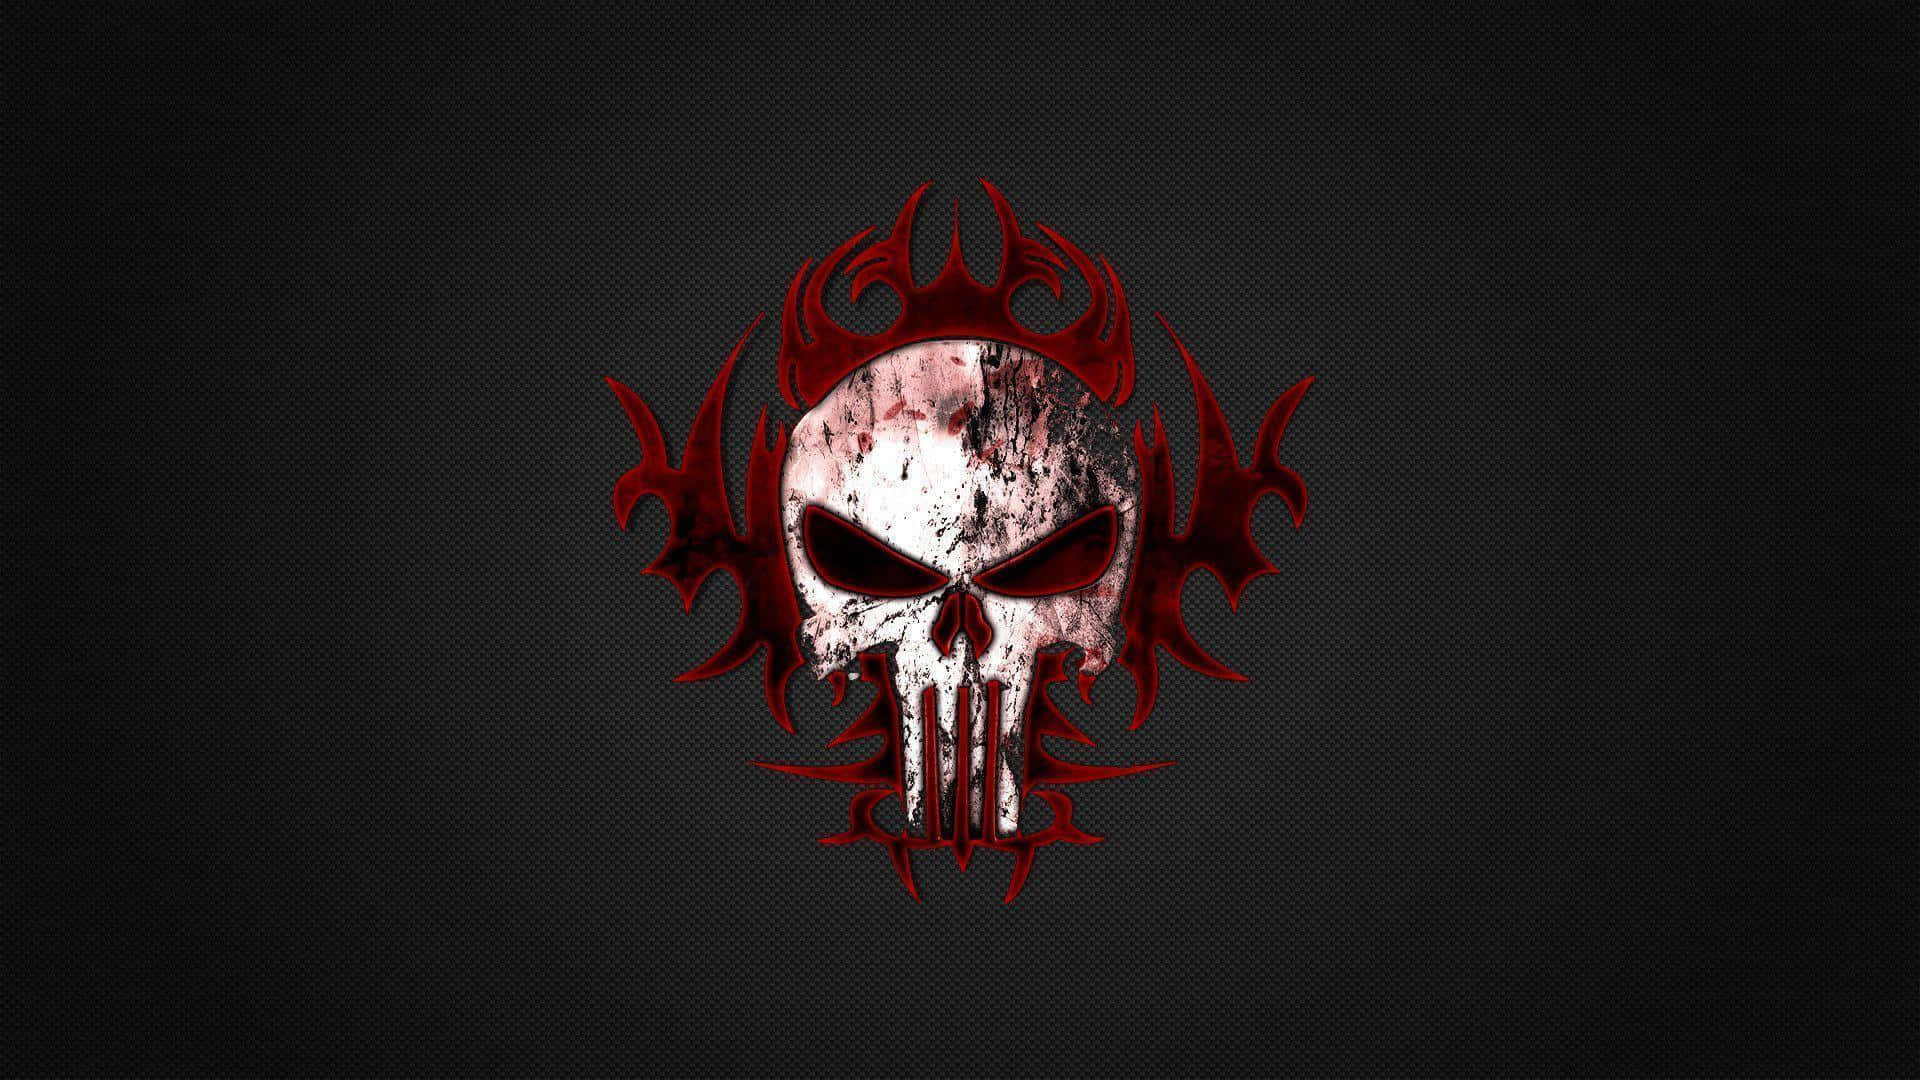 1920x1080 punisher wallpaper pictures free